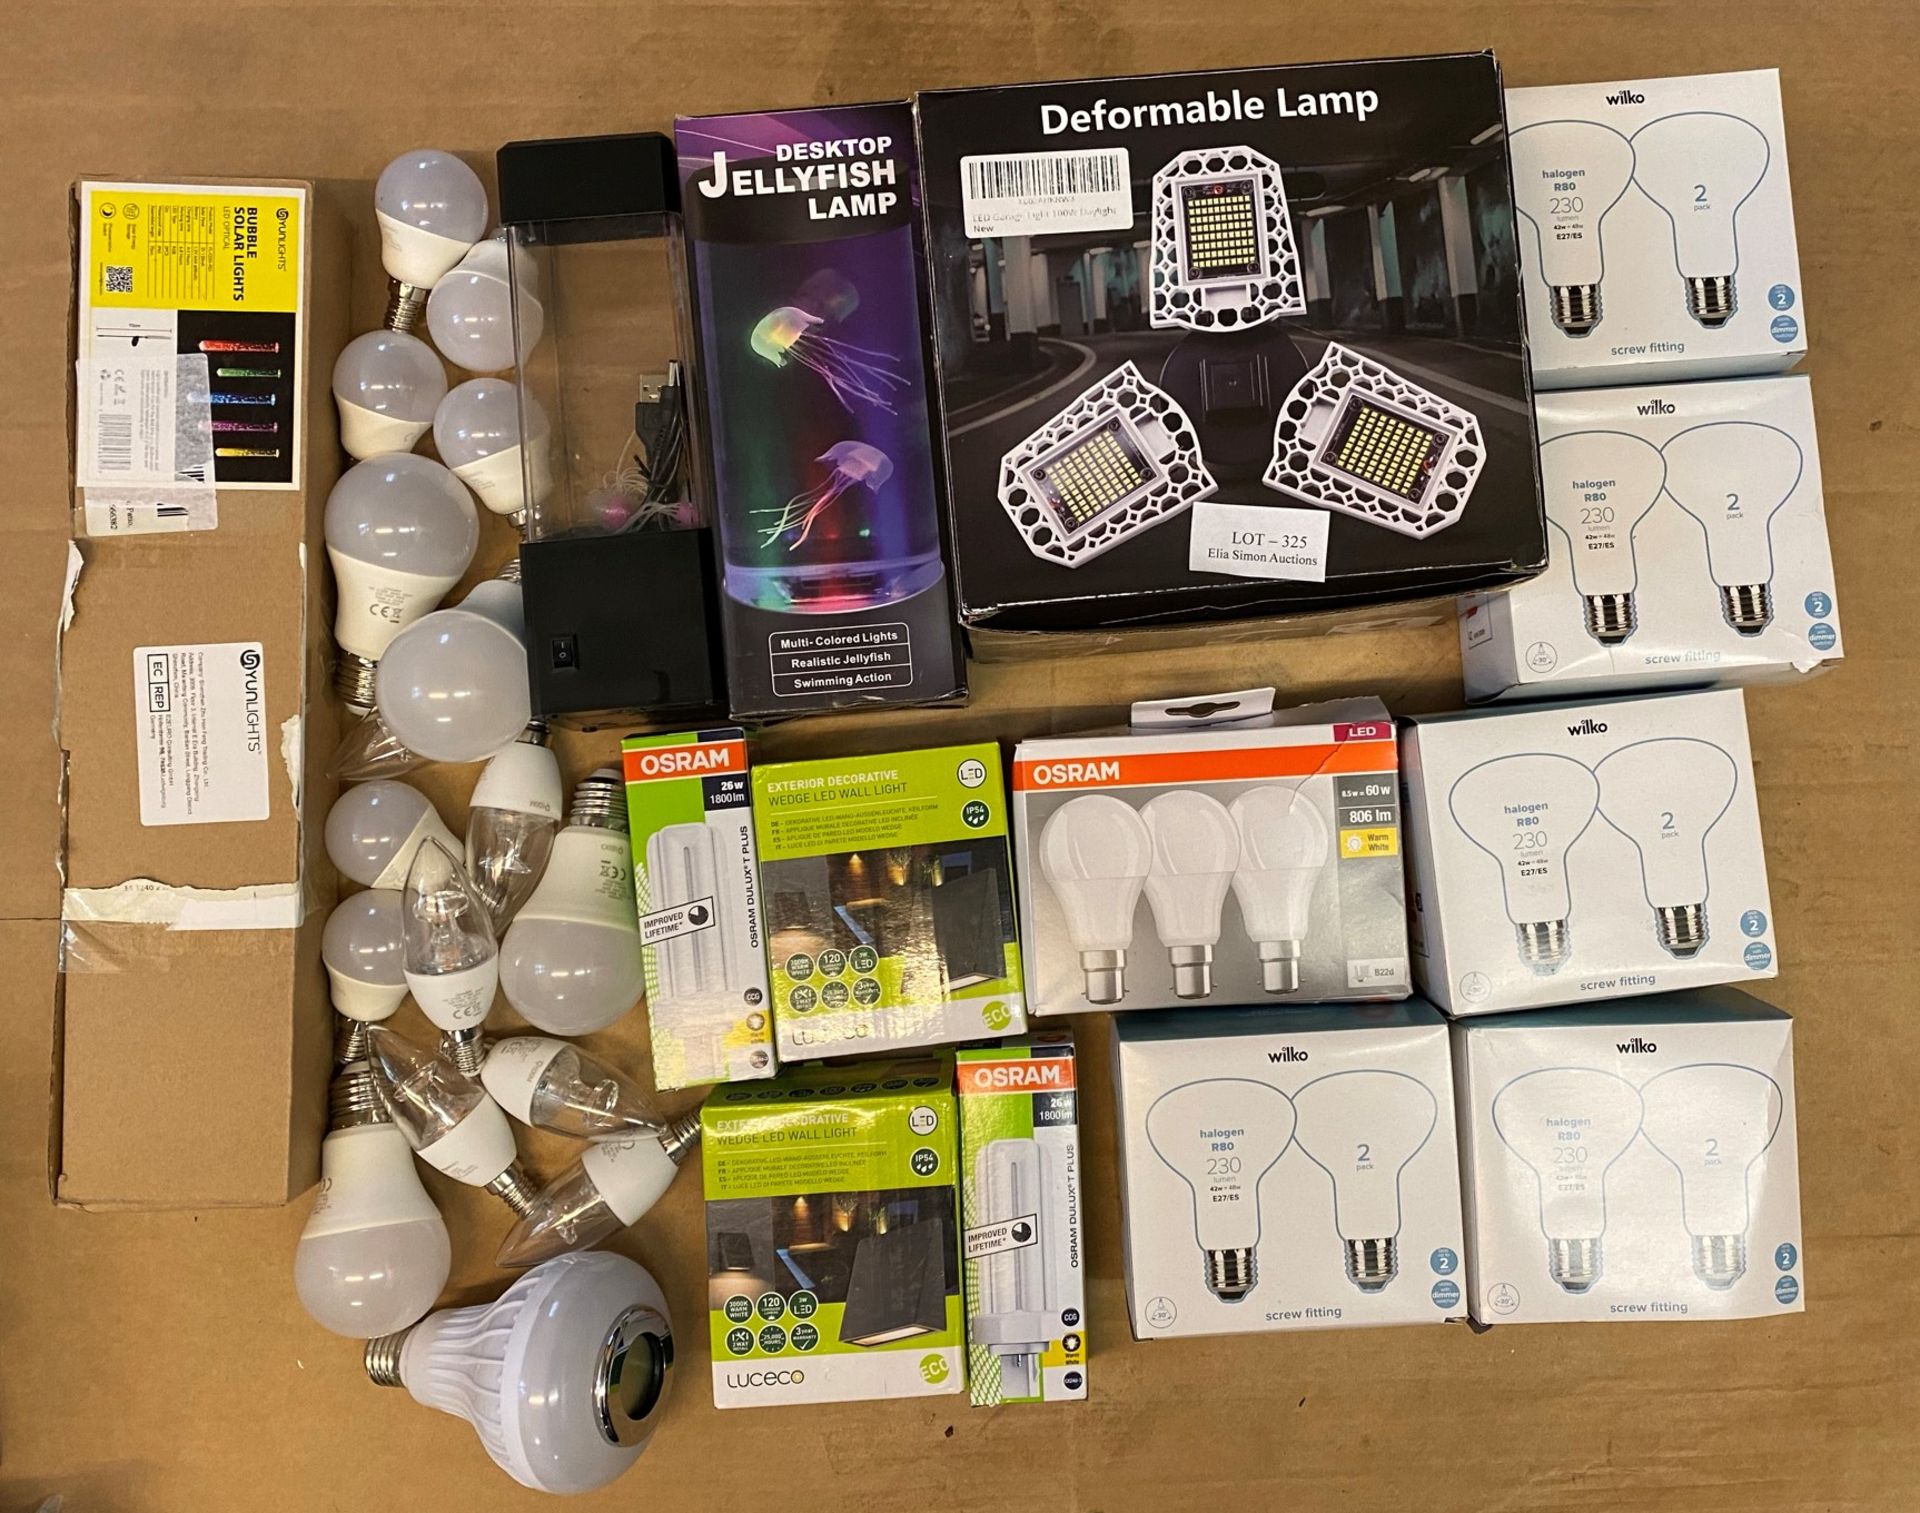 LARGE SELECTION OF LED LIGHTS INDOOR AND OUTDOOOR DEFORMABLE LAMP OSRAM WILKO